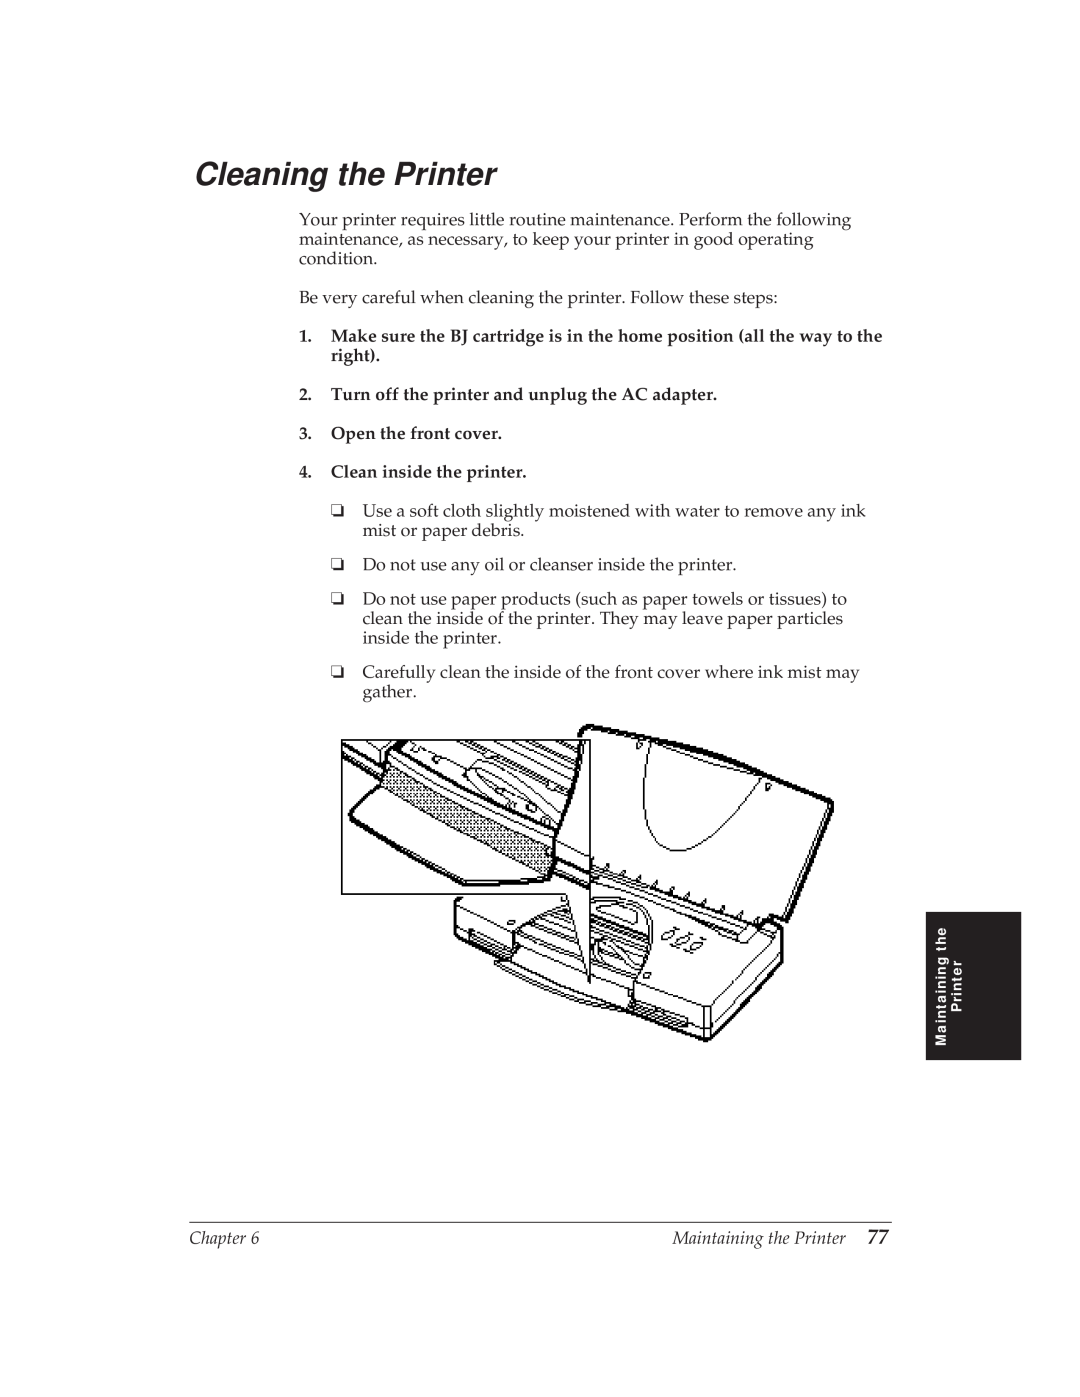 Canon BJ-30 manual Cleaning the Printer, Turn off the printer and unplug the AC adapter 